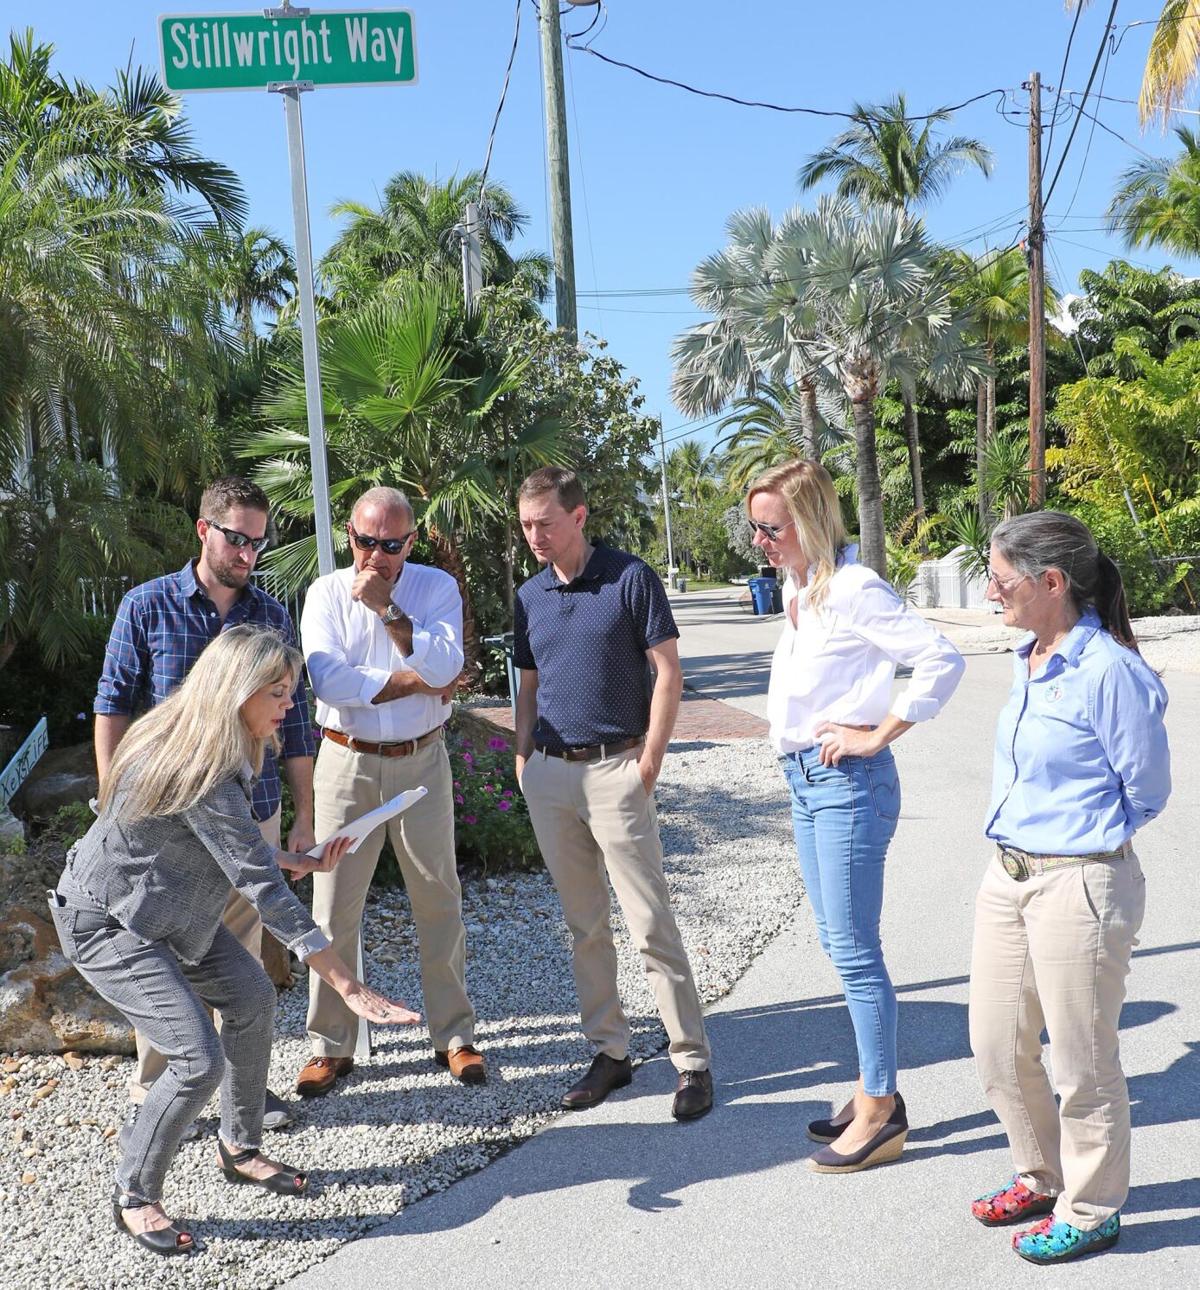 Brooks and Blalock walk through Stillwright Point in Key Largo, where Monroe County’s Chief Resilience Officer Rhonda Haag shows how high water can reach in the neighborhood. Both Key Largo neighborhoods are on the State’s Resilient Florida list.